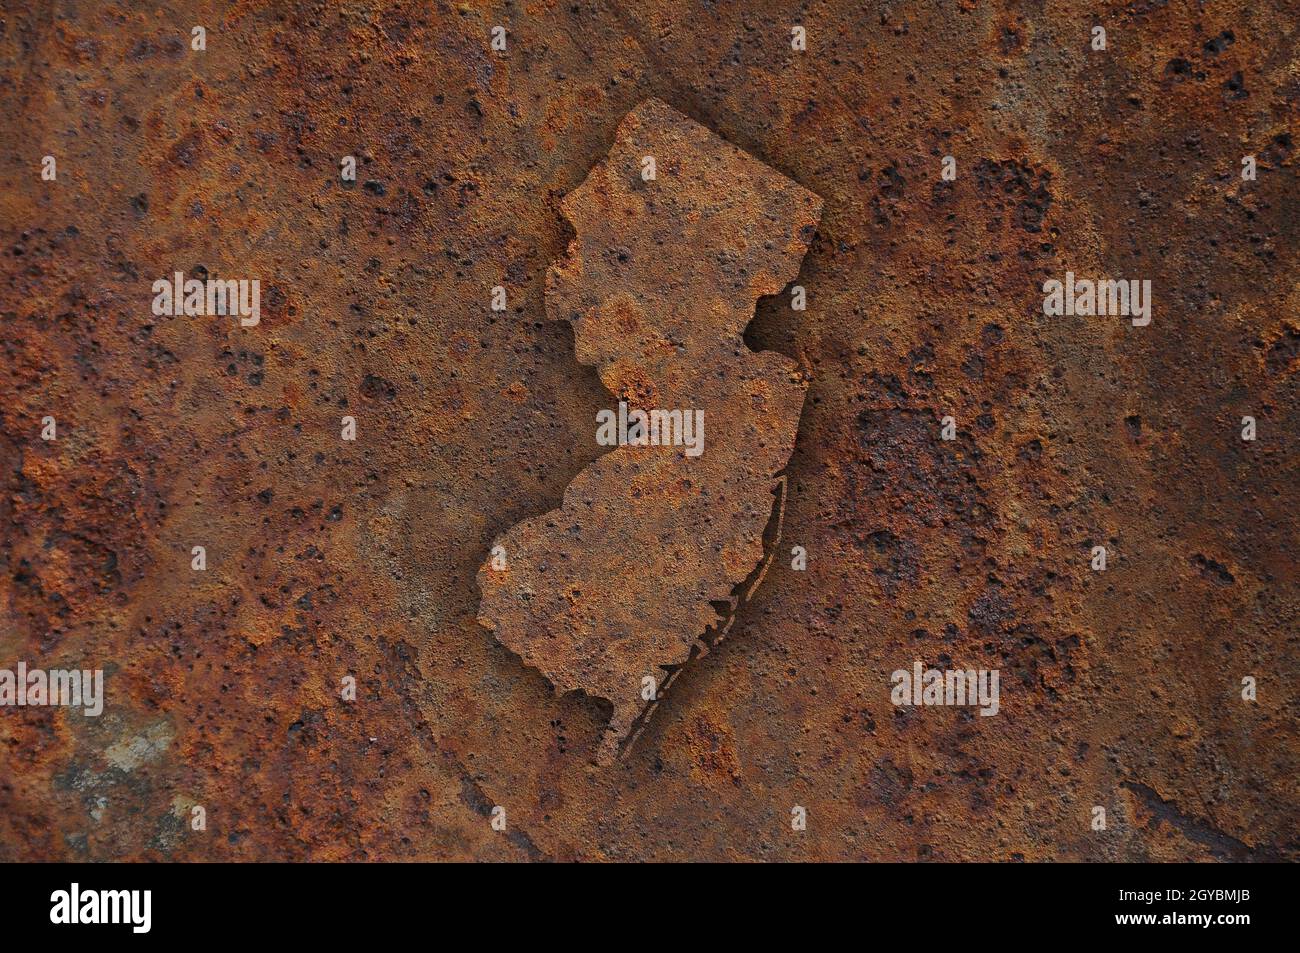 Map of New Jersey on rusty metal Stock Photo